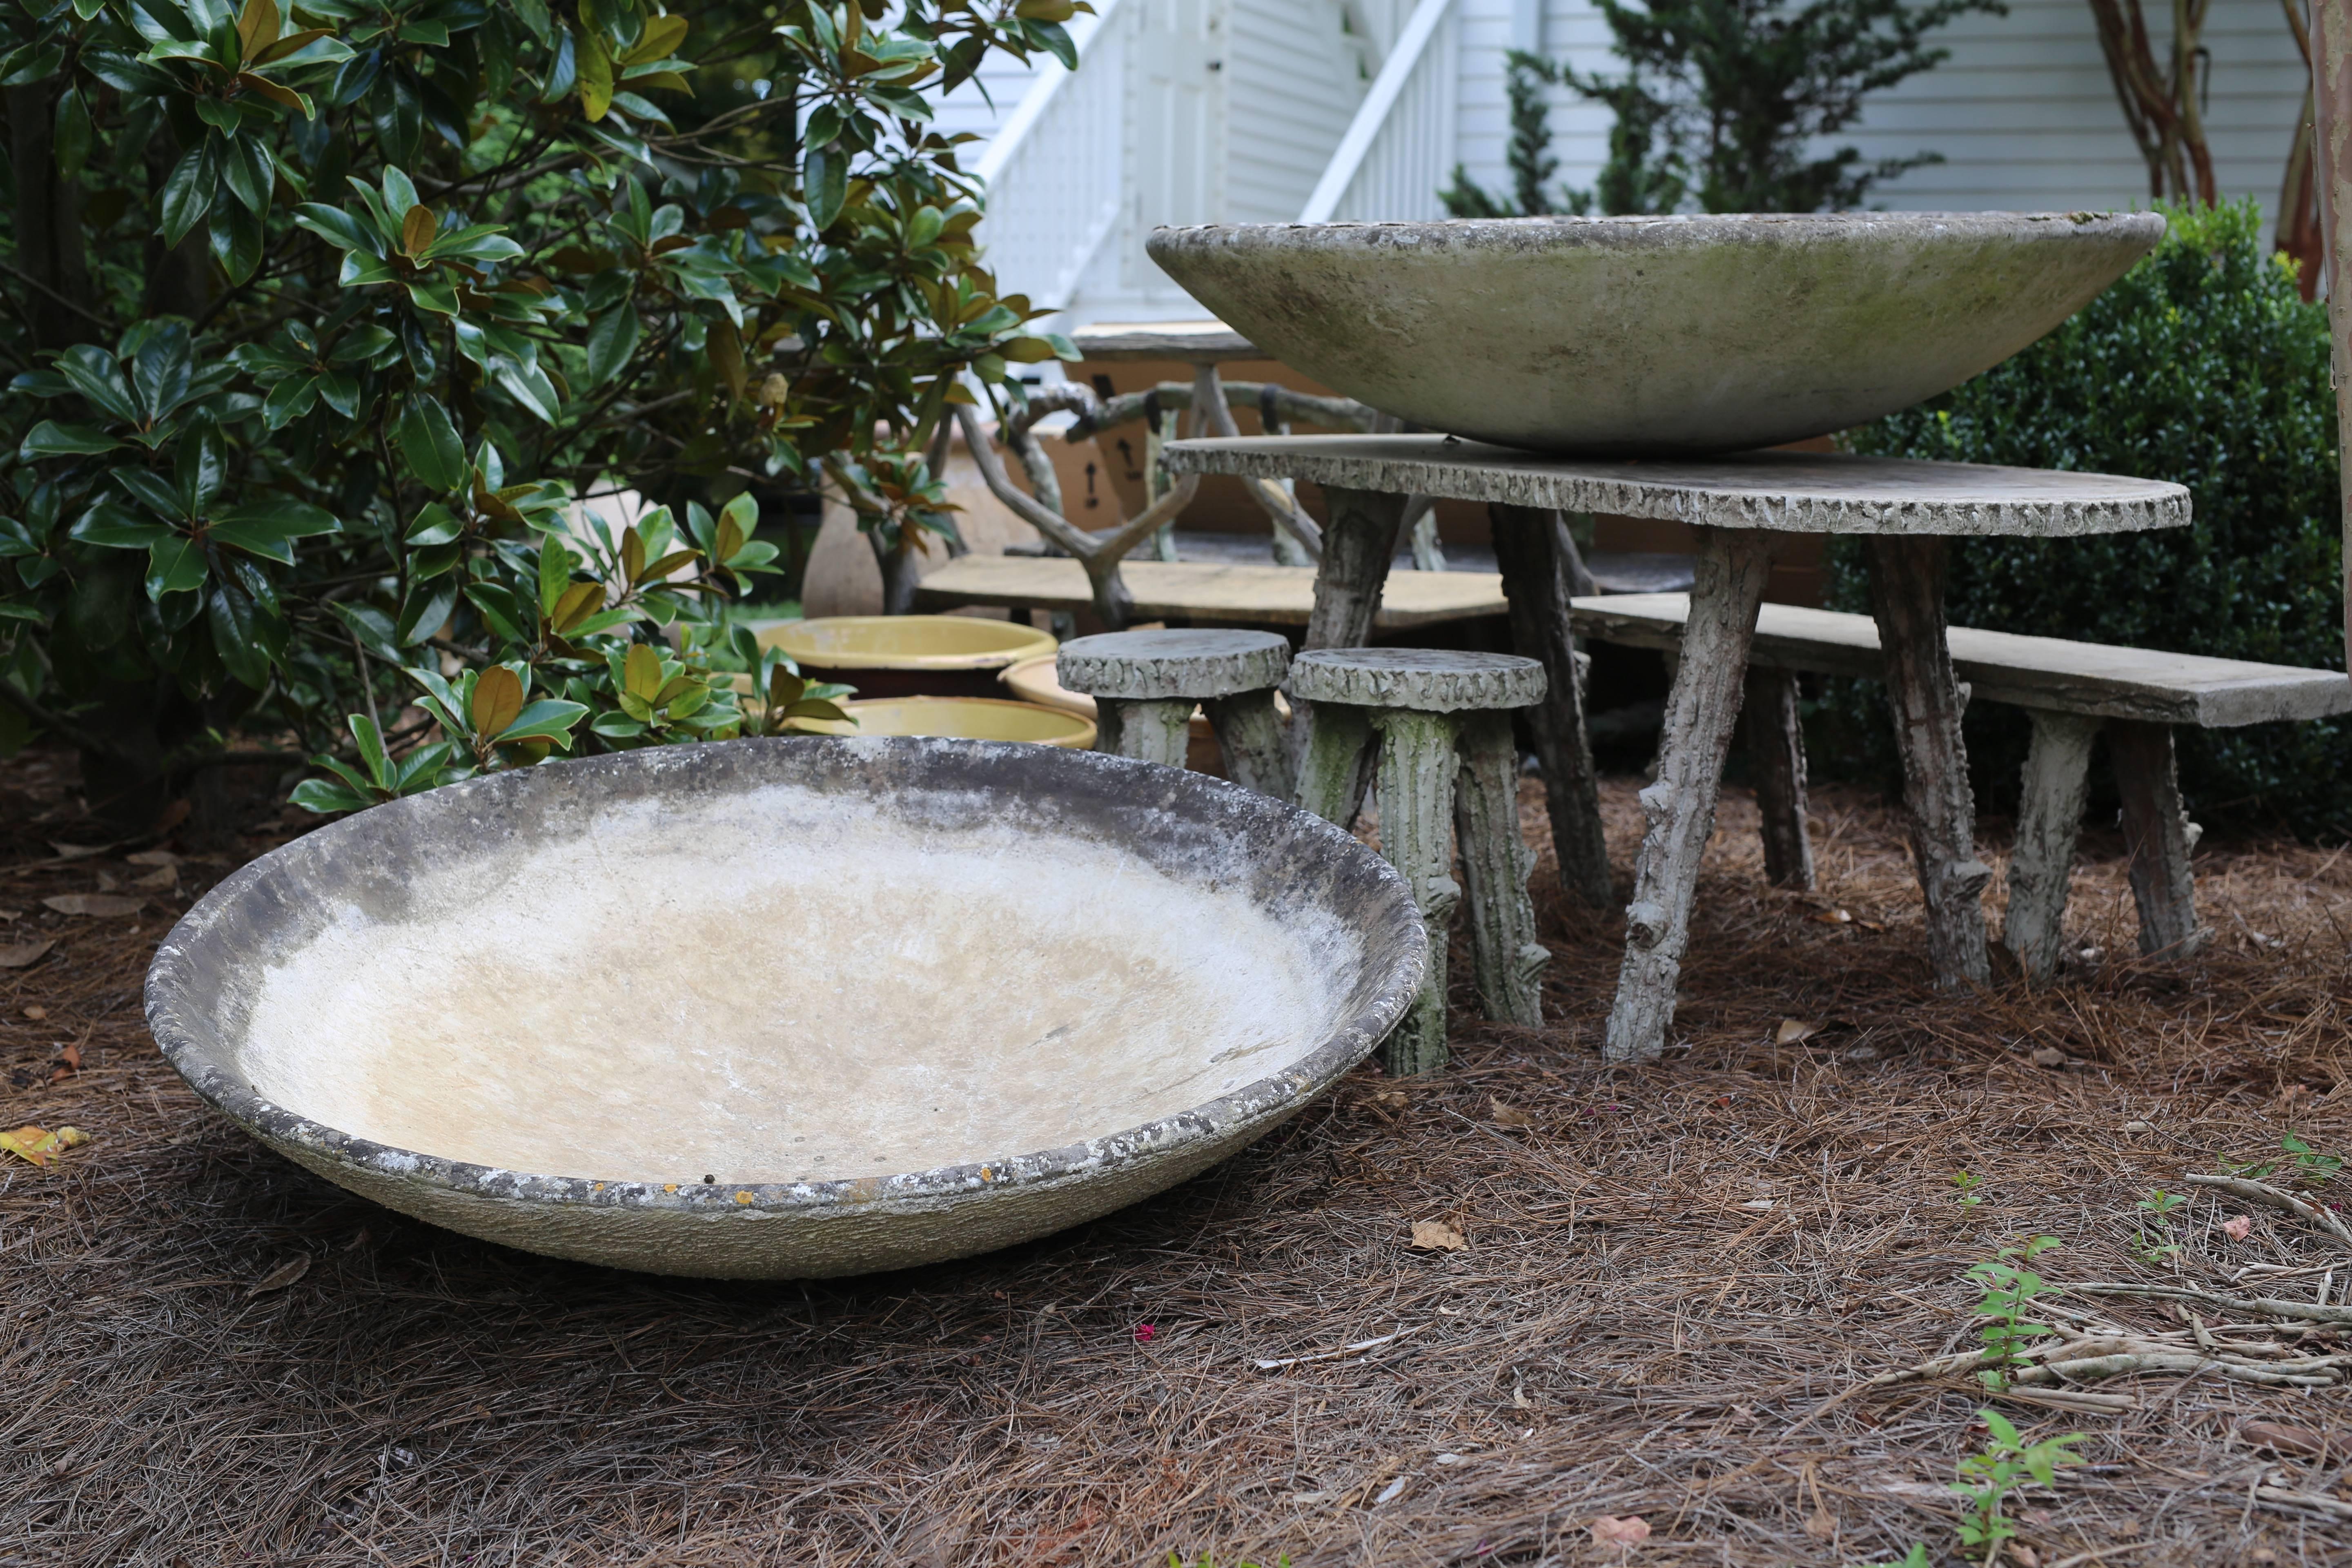 Pair of Giant Willy Guhl saucer planters from Sweden made from fibrated cement. Stamped and marked. May be purchased separately for $2750 each or as a pair for $5,000.